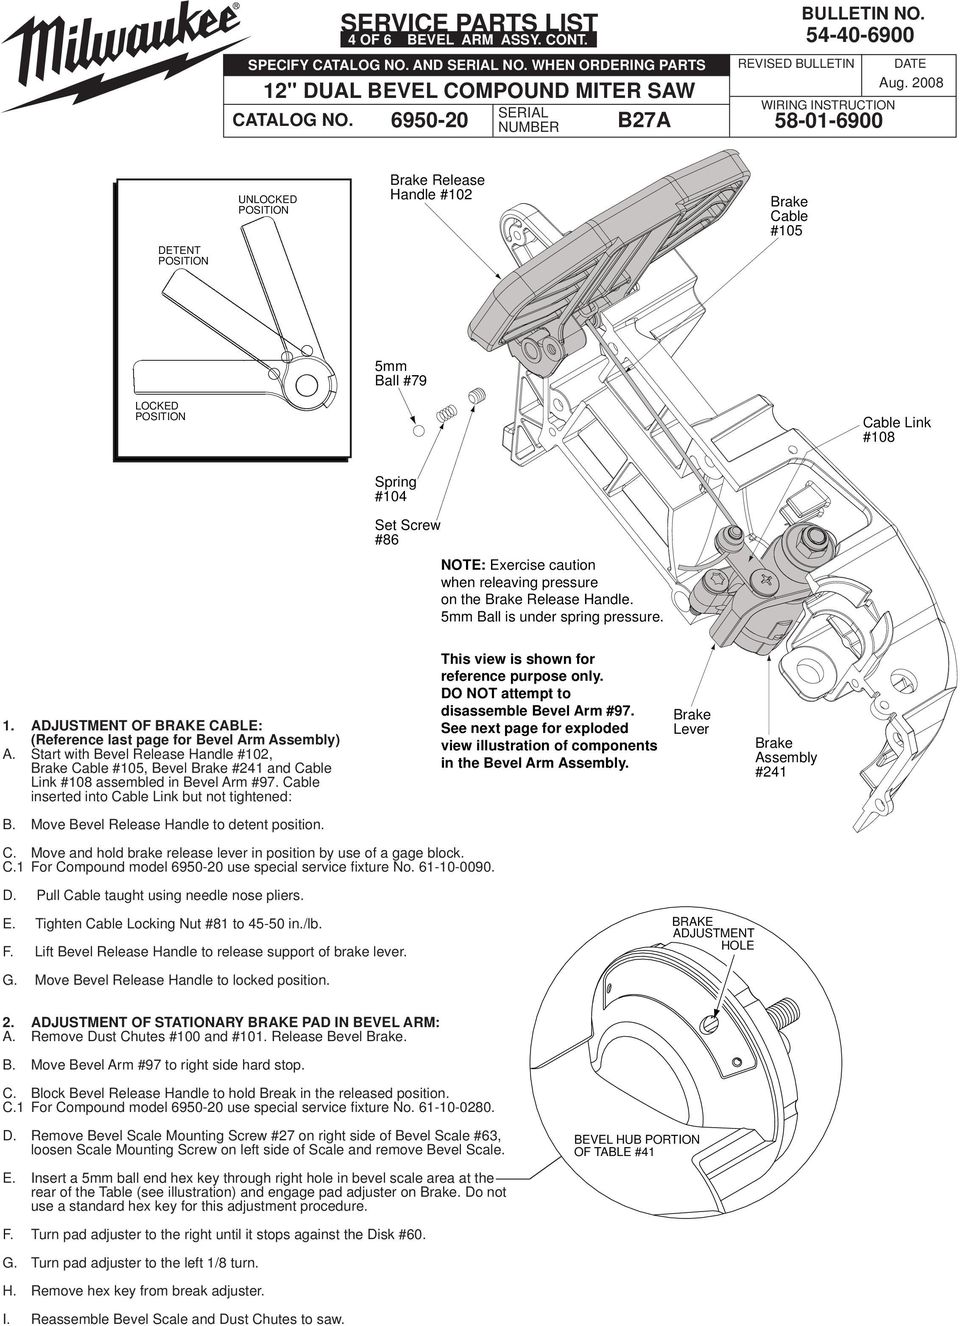 releaving pressure on the Brake Release Handle. 5mm Ball is under spring pressure. 1. ADJUSTMENT OF BRAKE CABLE: (Reference last page for Bevel Arm Assembly) A.